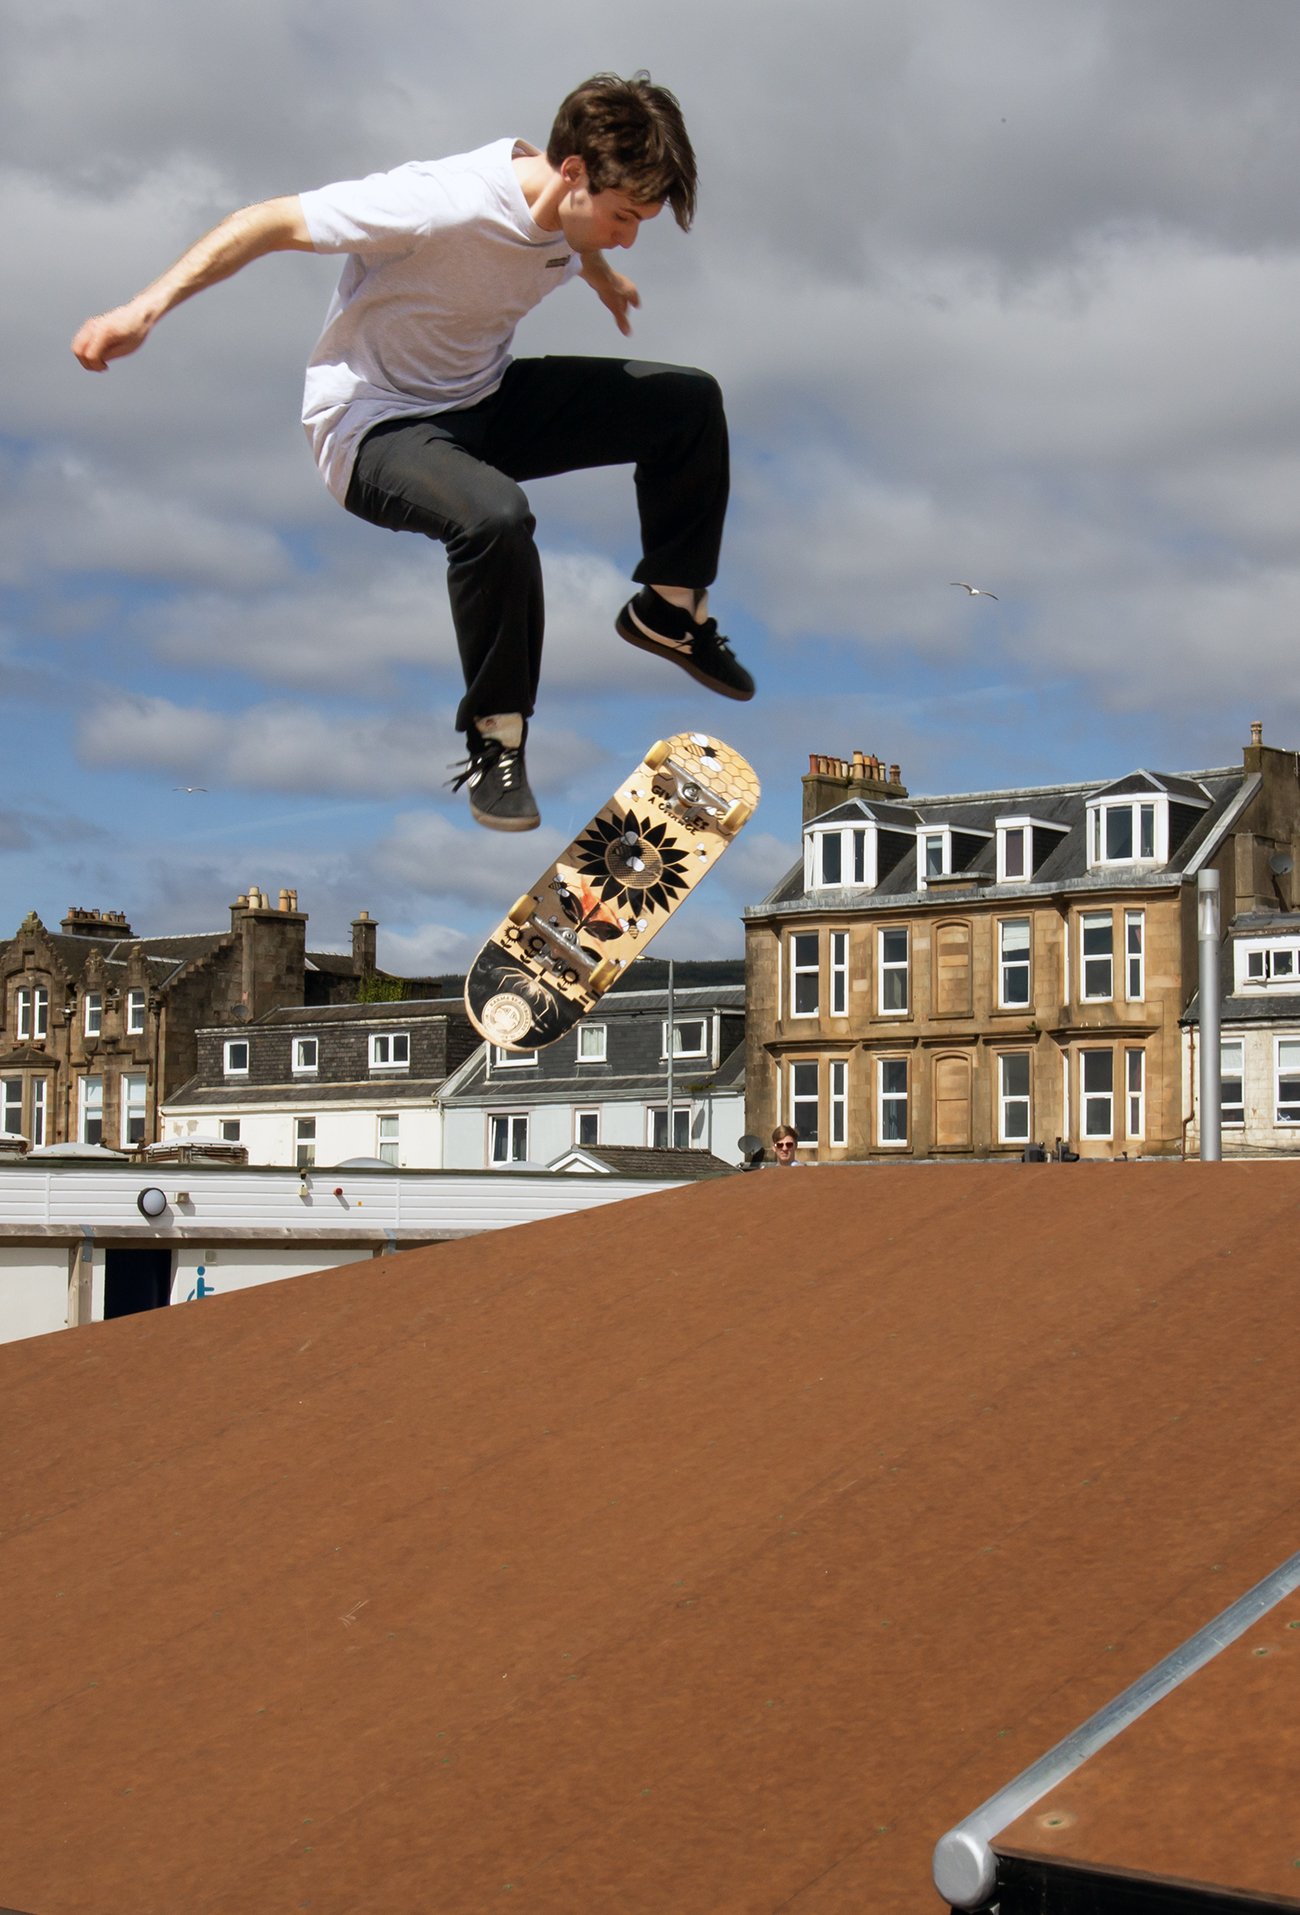 Helensburgh Skate Park enjoyed its first day on Saturday, April 20 as young people tried out the new ramps